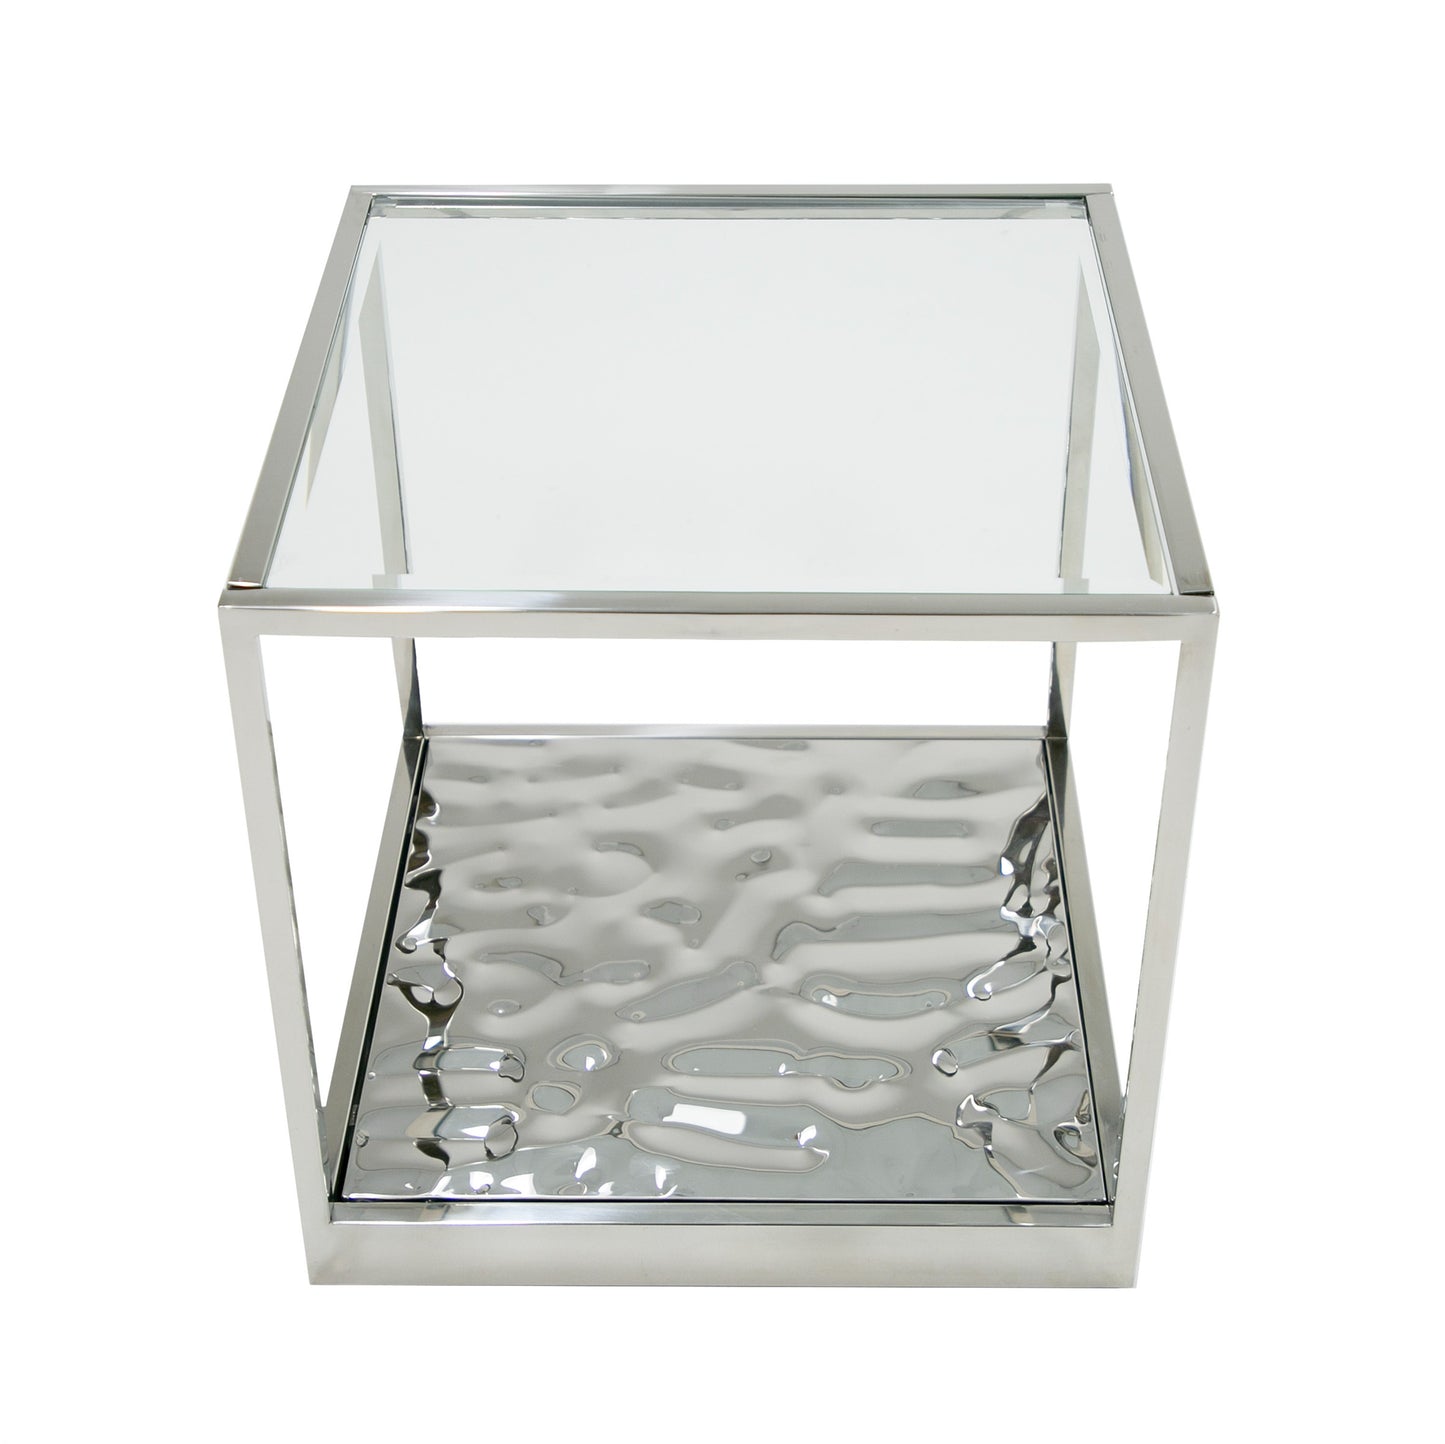 Modrest Braxton - Contemporary Clear Wave Glass End Table